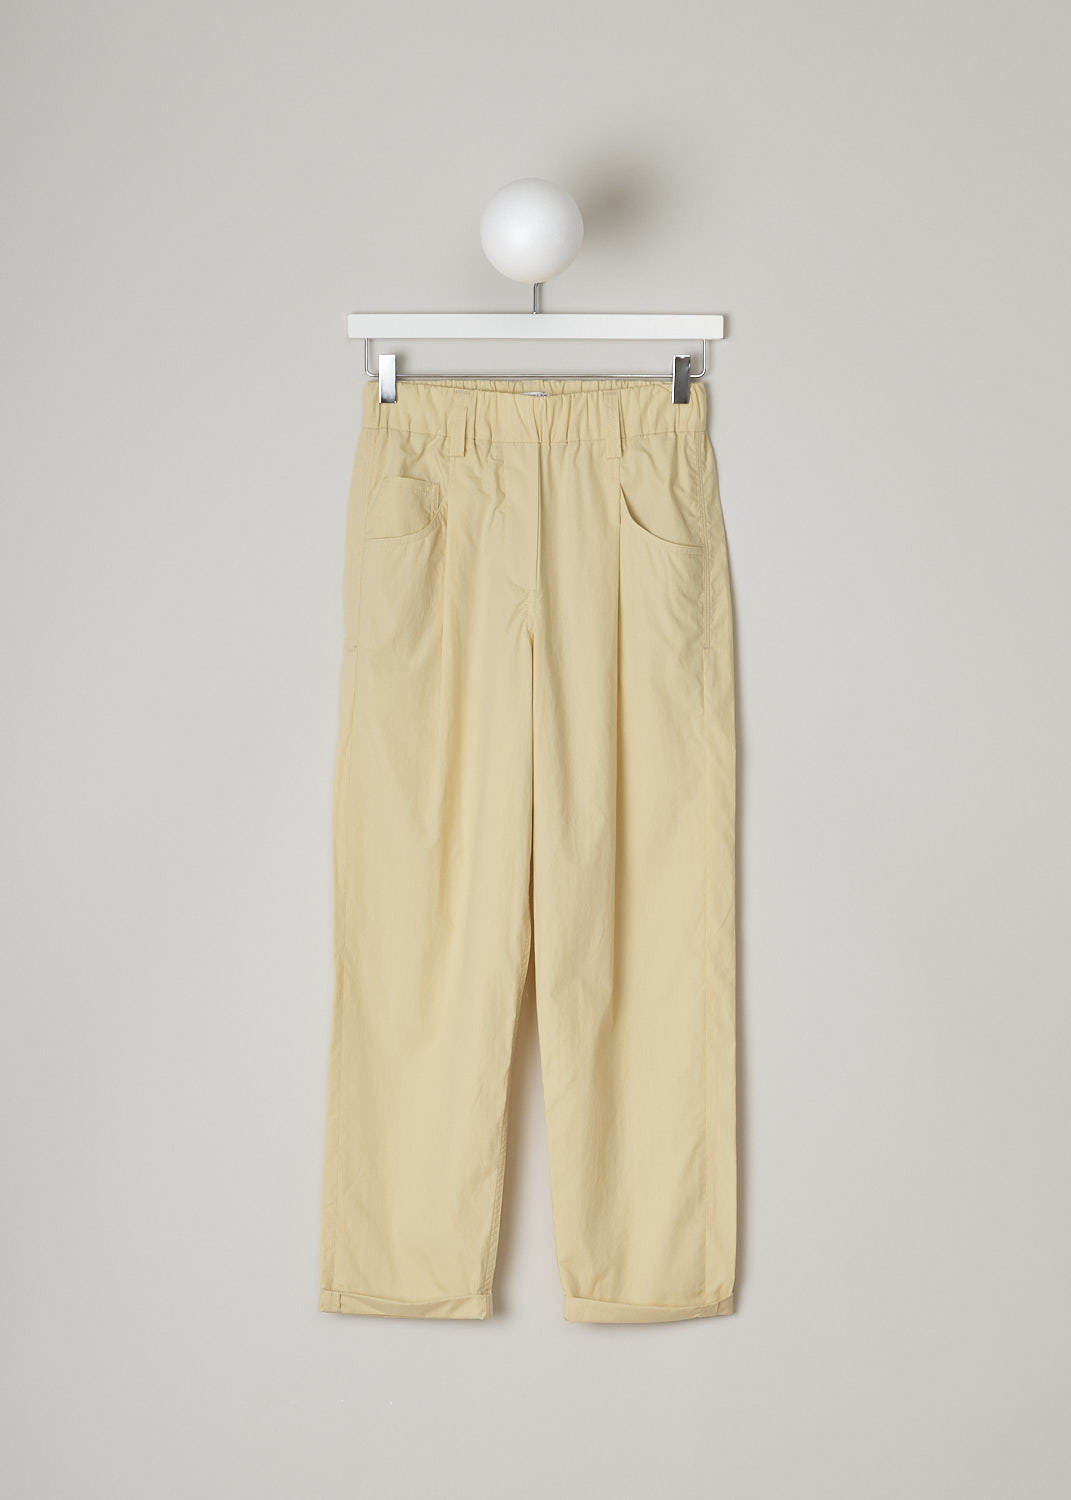 BRUNELLO CUCINELLI, PALE YELLOW SLIP-ON PANTS, M0H93P7894_C8612, Yellow, Front, These pale yellow high-waisted slip-on pants have an elasticated waistband with belt loops and a mock-fly stitched on the front. These pants have a traditional five pocket configuration, with two pockets and a single coin pocket in the front and two patch pockets in the back. The straight cropped pant legs have front pleats.  
